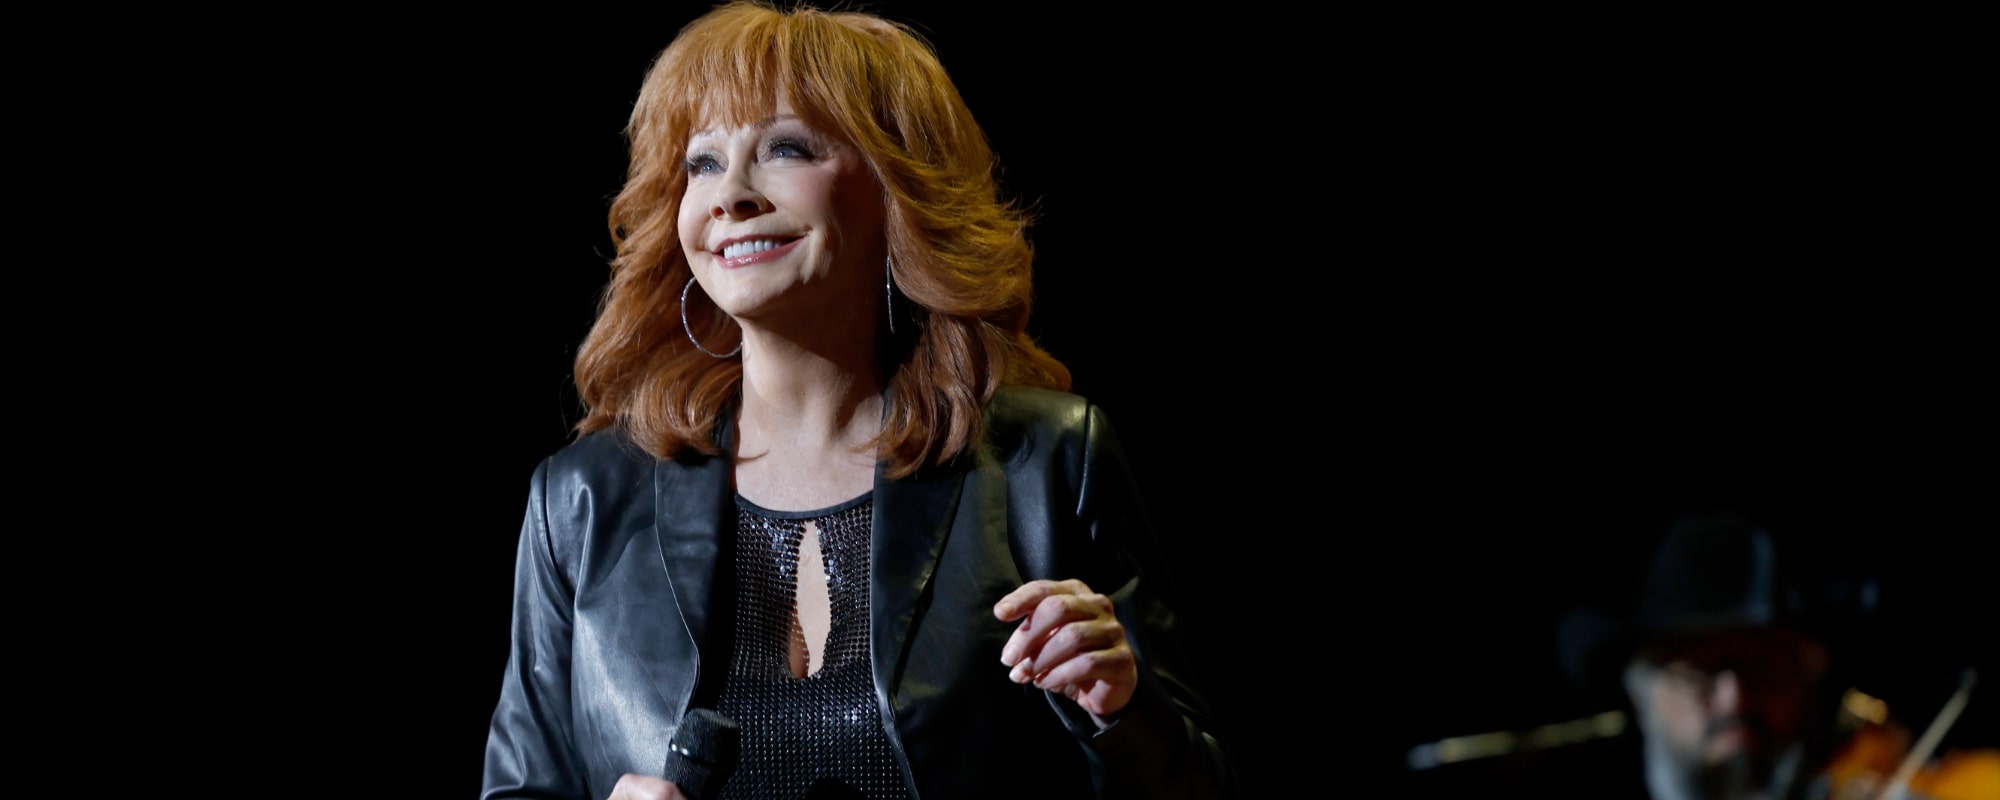 Reba McEntire Says She’s Honored to Sing the National Anthem at the Super Bowl, Reveals How She Prepared for the Performance